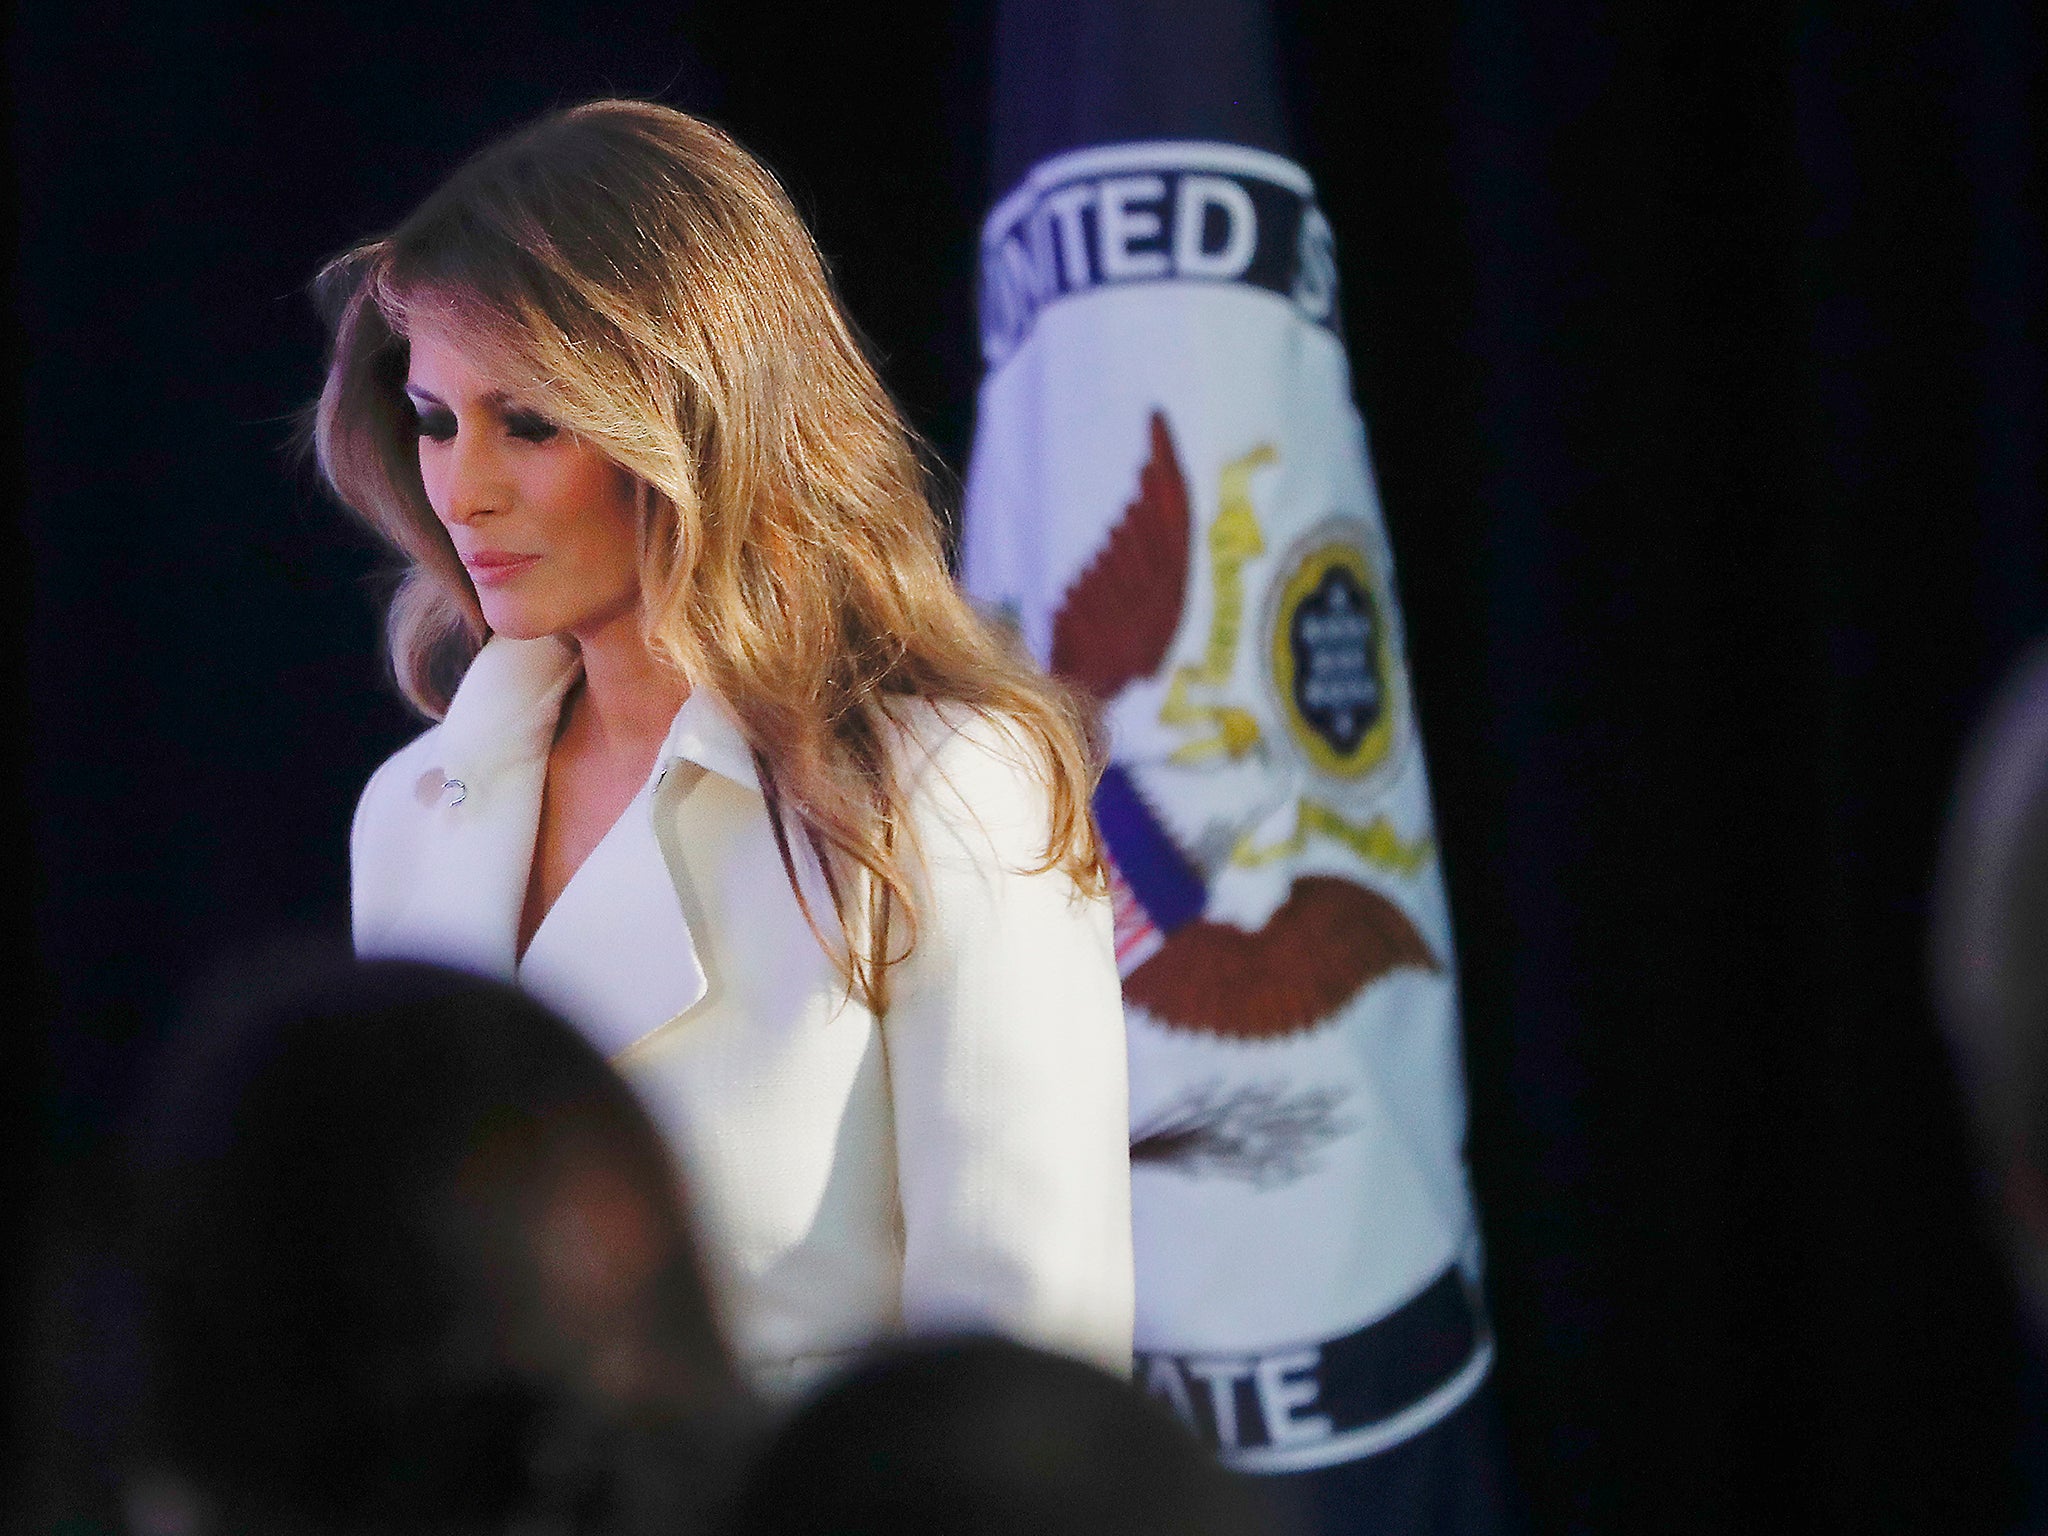 The First Lady is currently living separately from Donald Trump